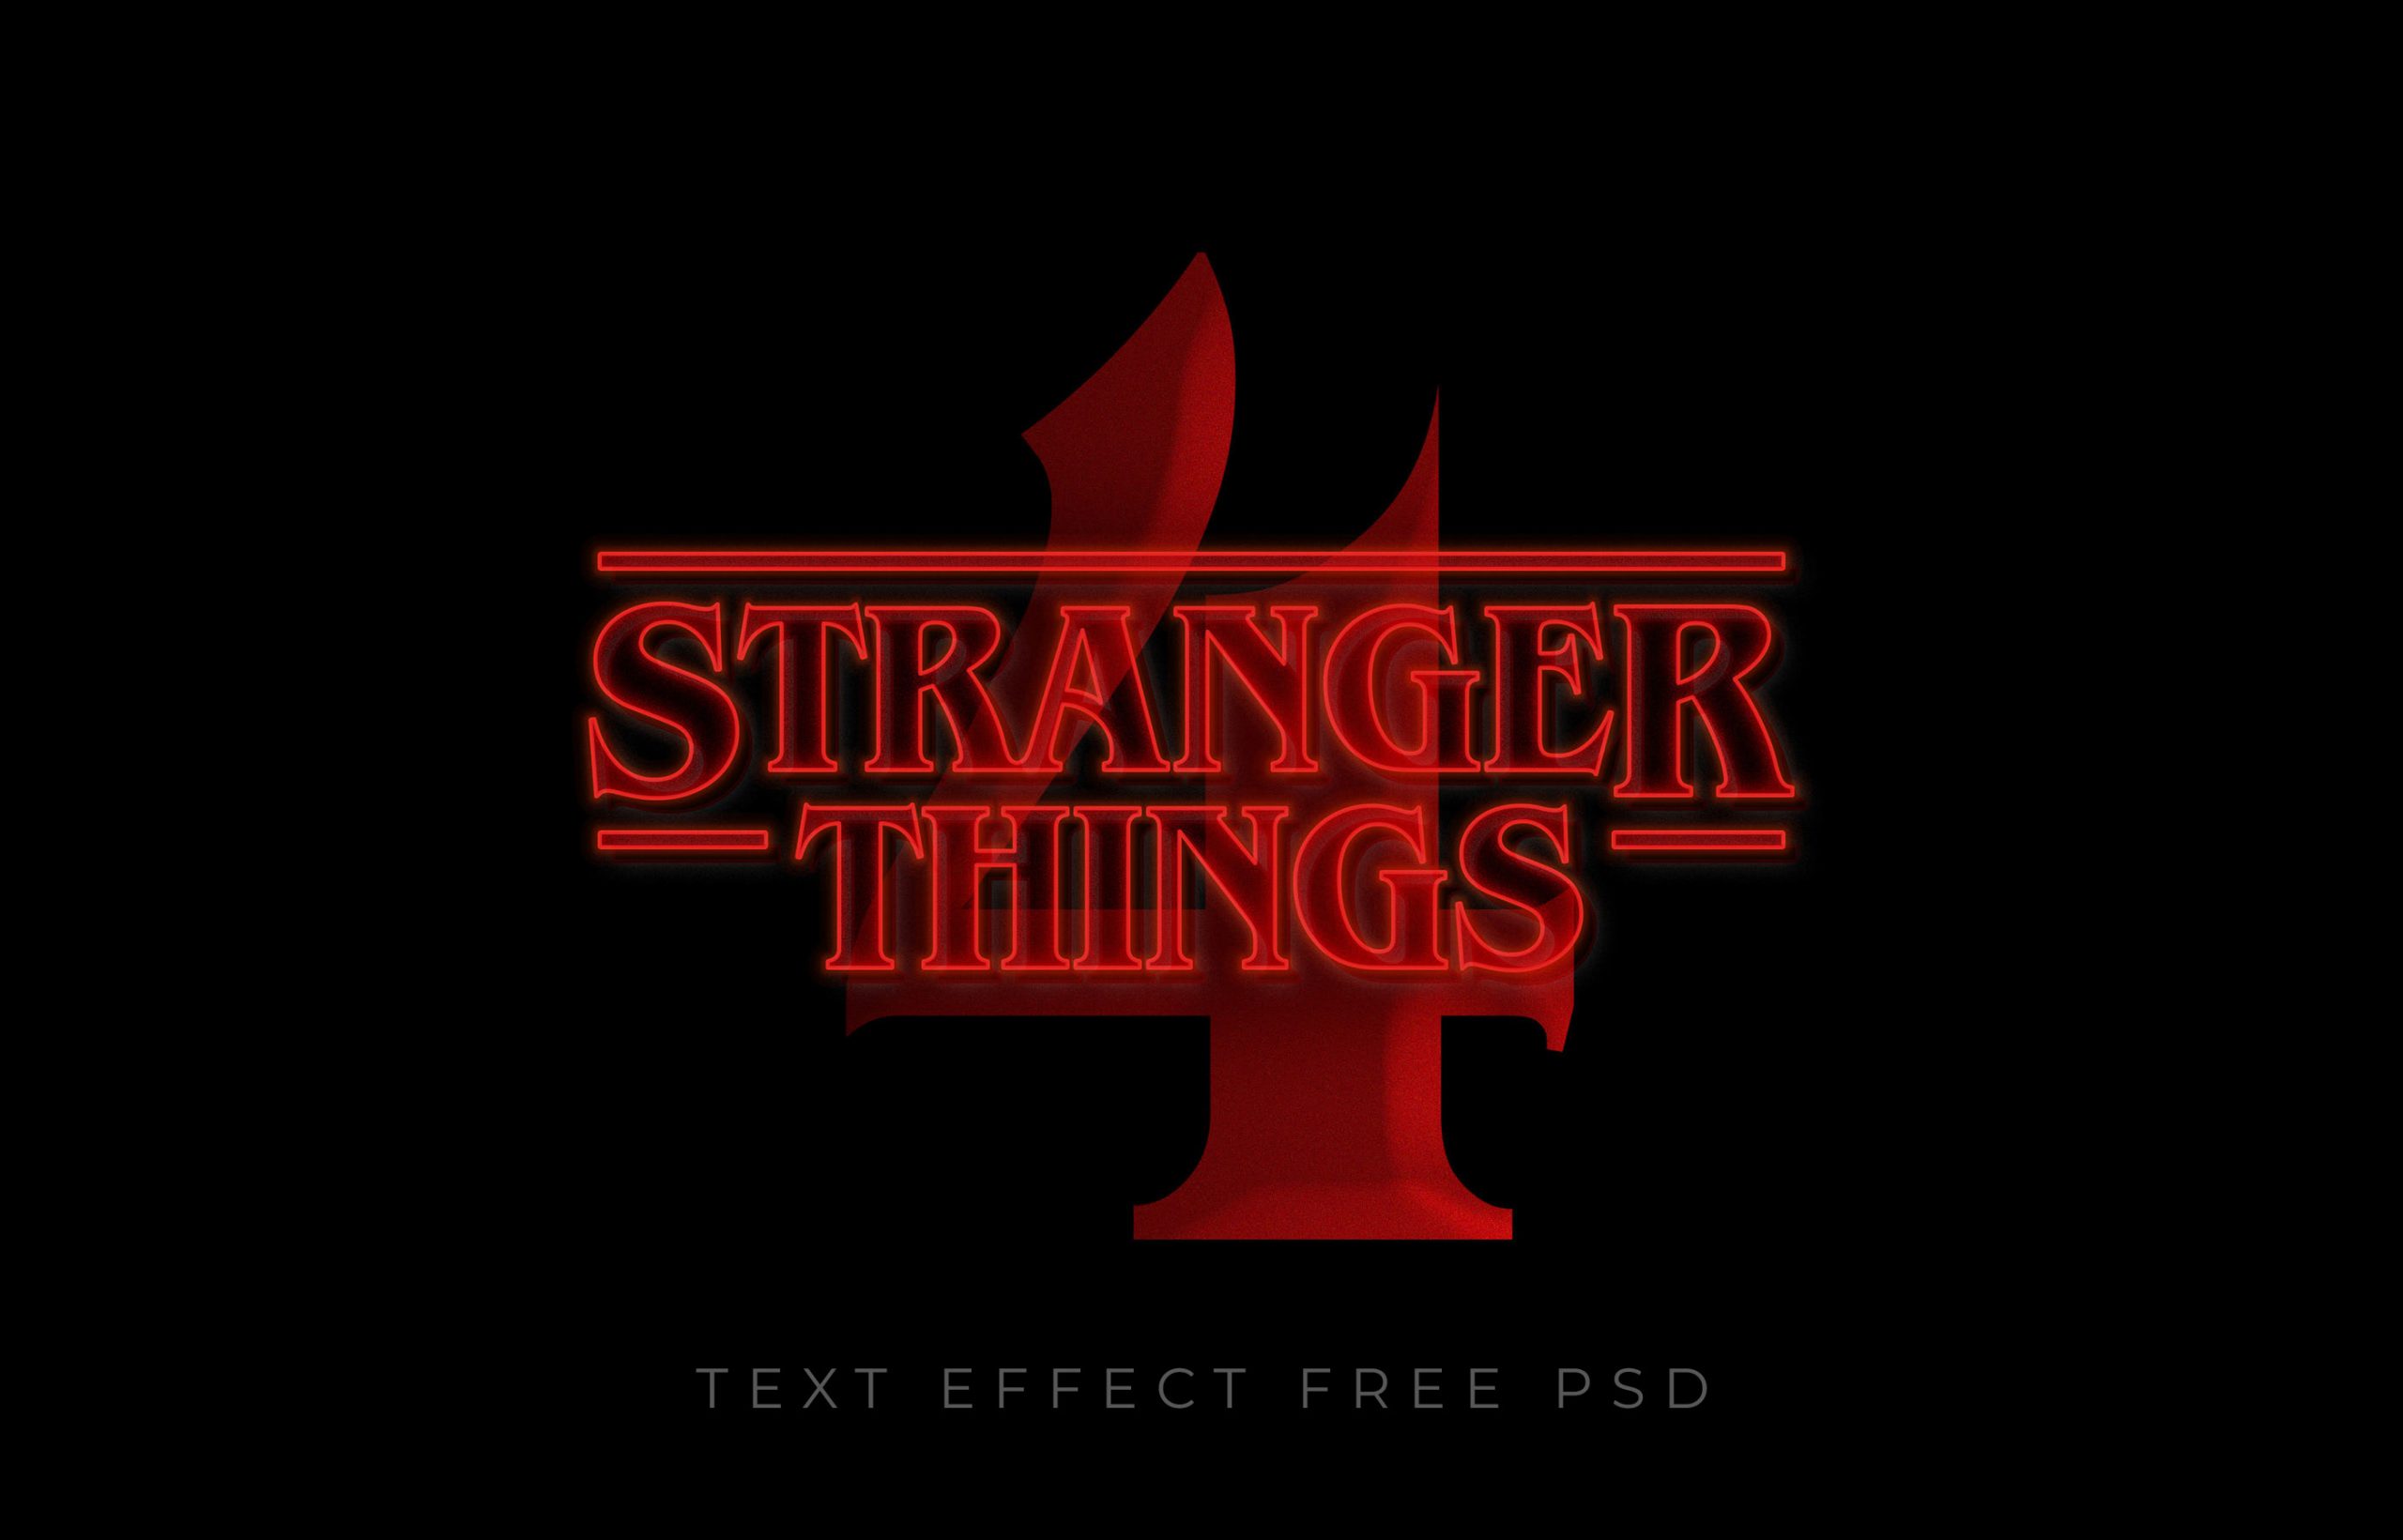 Download Free Stranger Things 4 Text Effect Free PSD